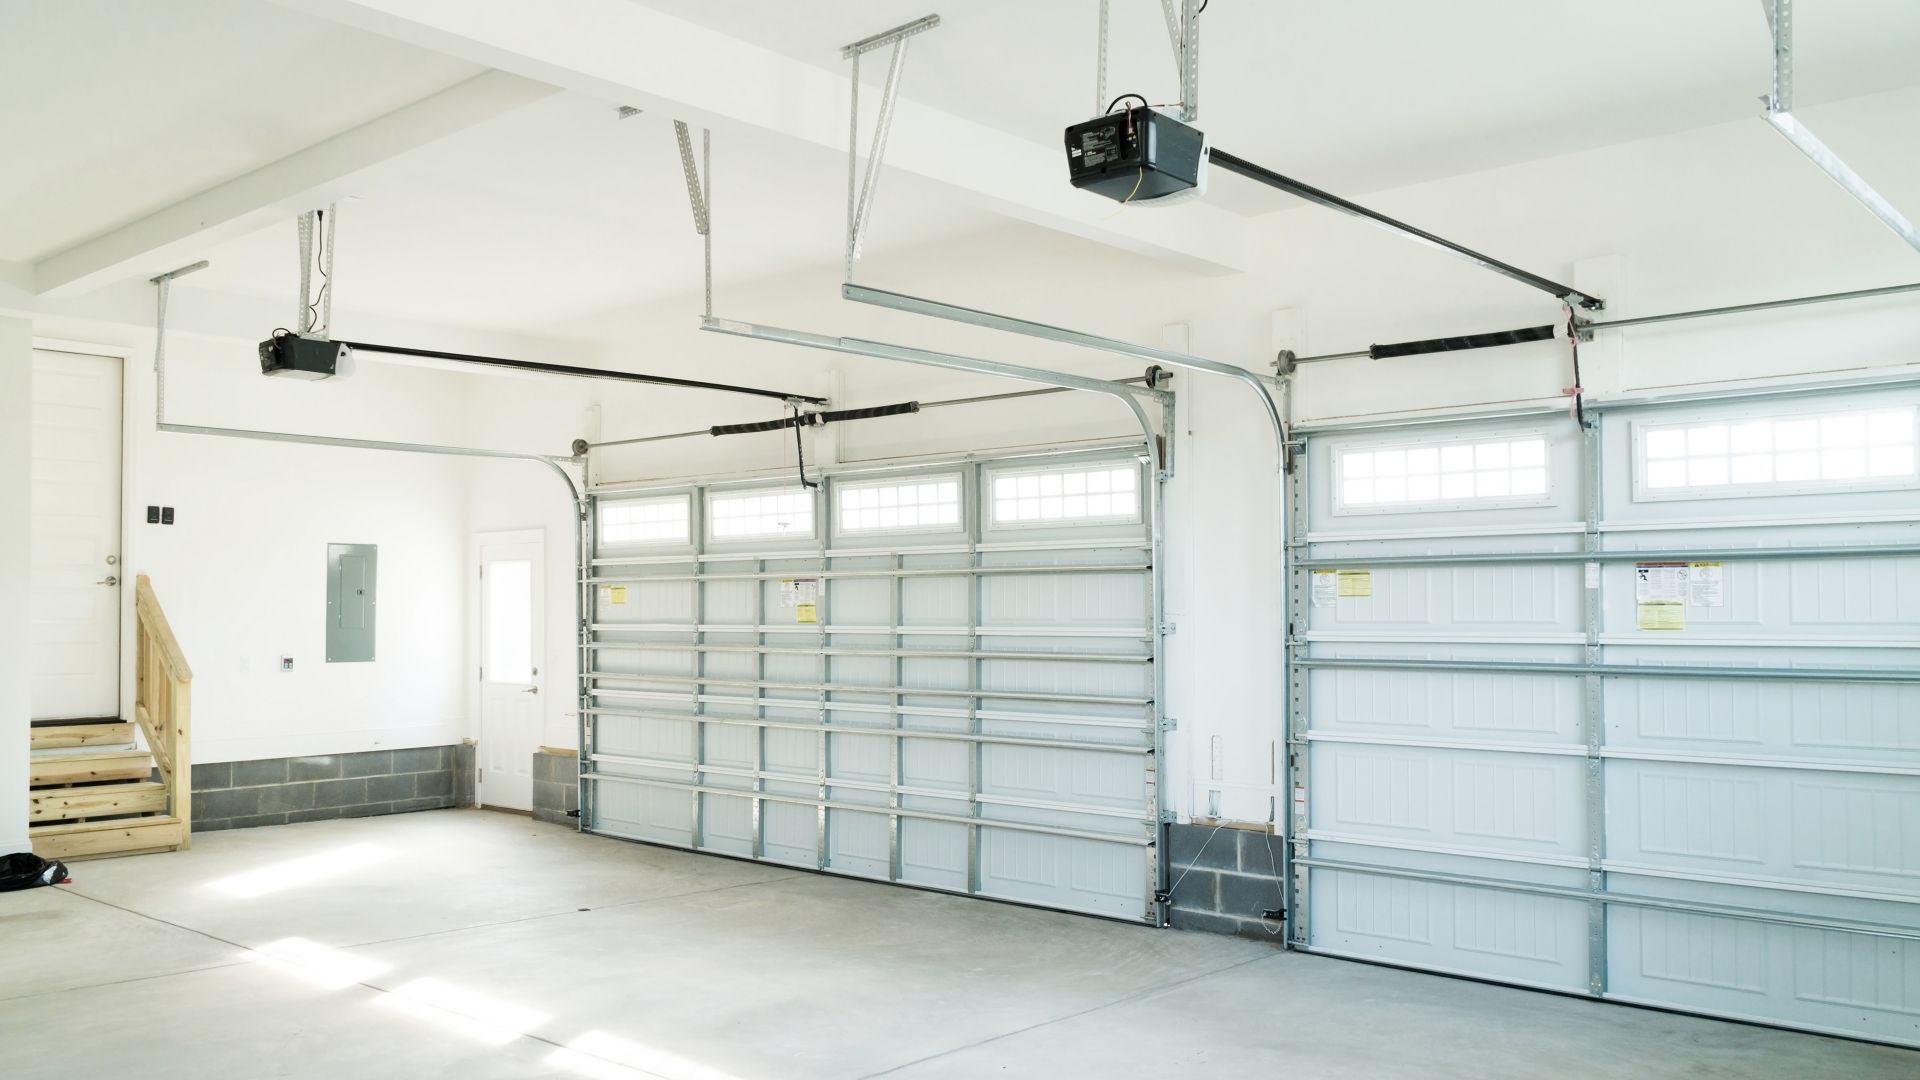 Where to use products for your garage floor and mounting garage door